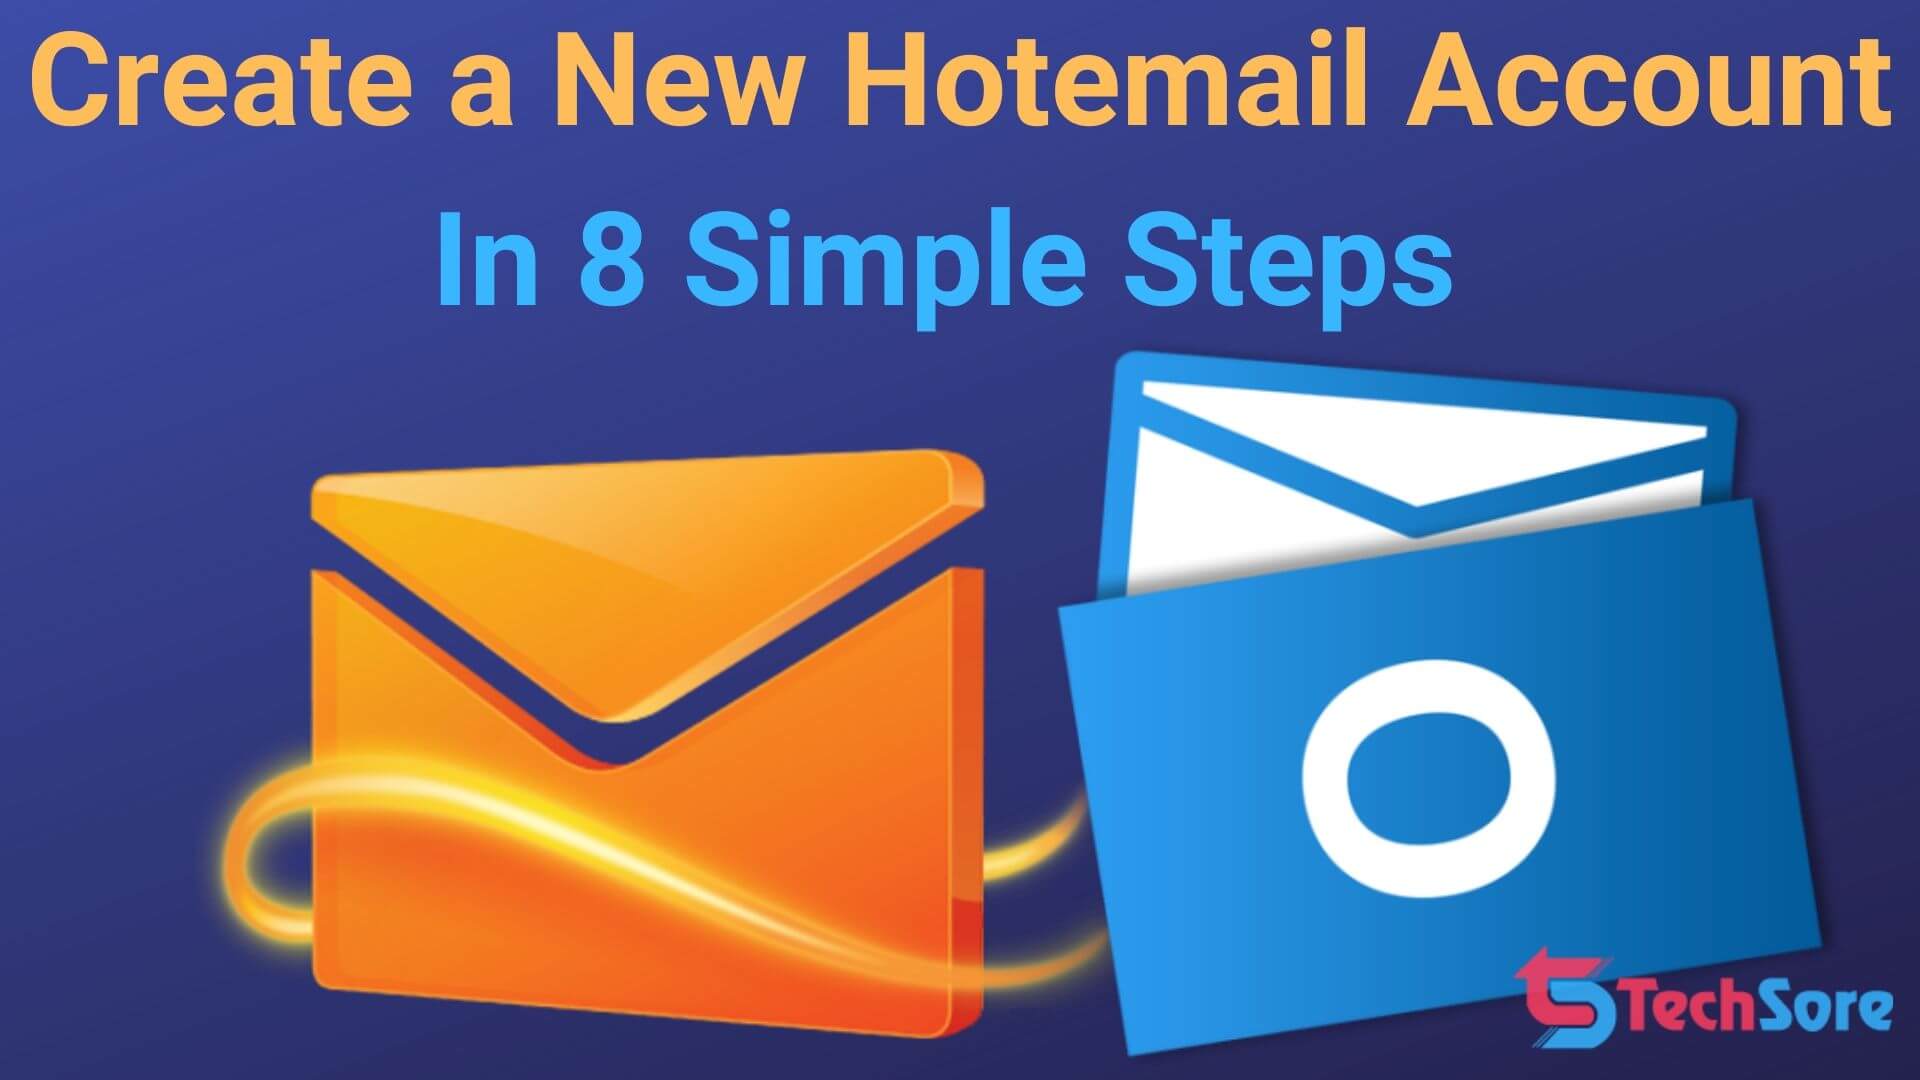 Create a New Hotemail Account In 8 Simple Steps